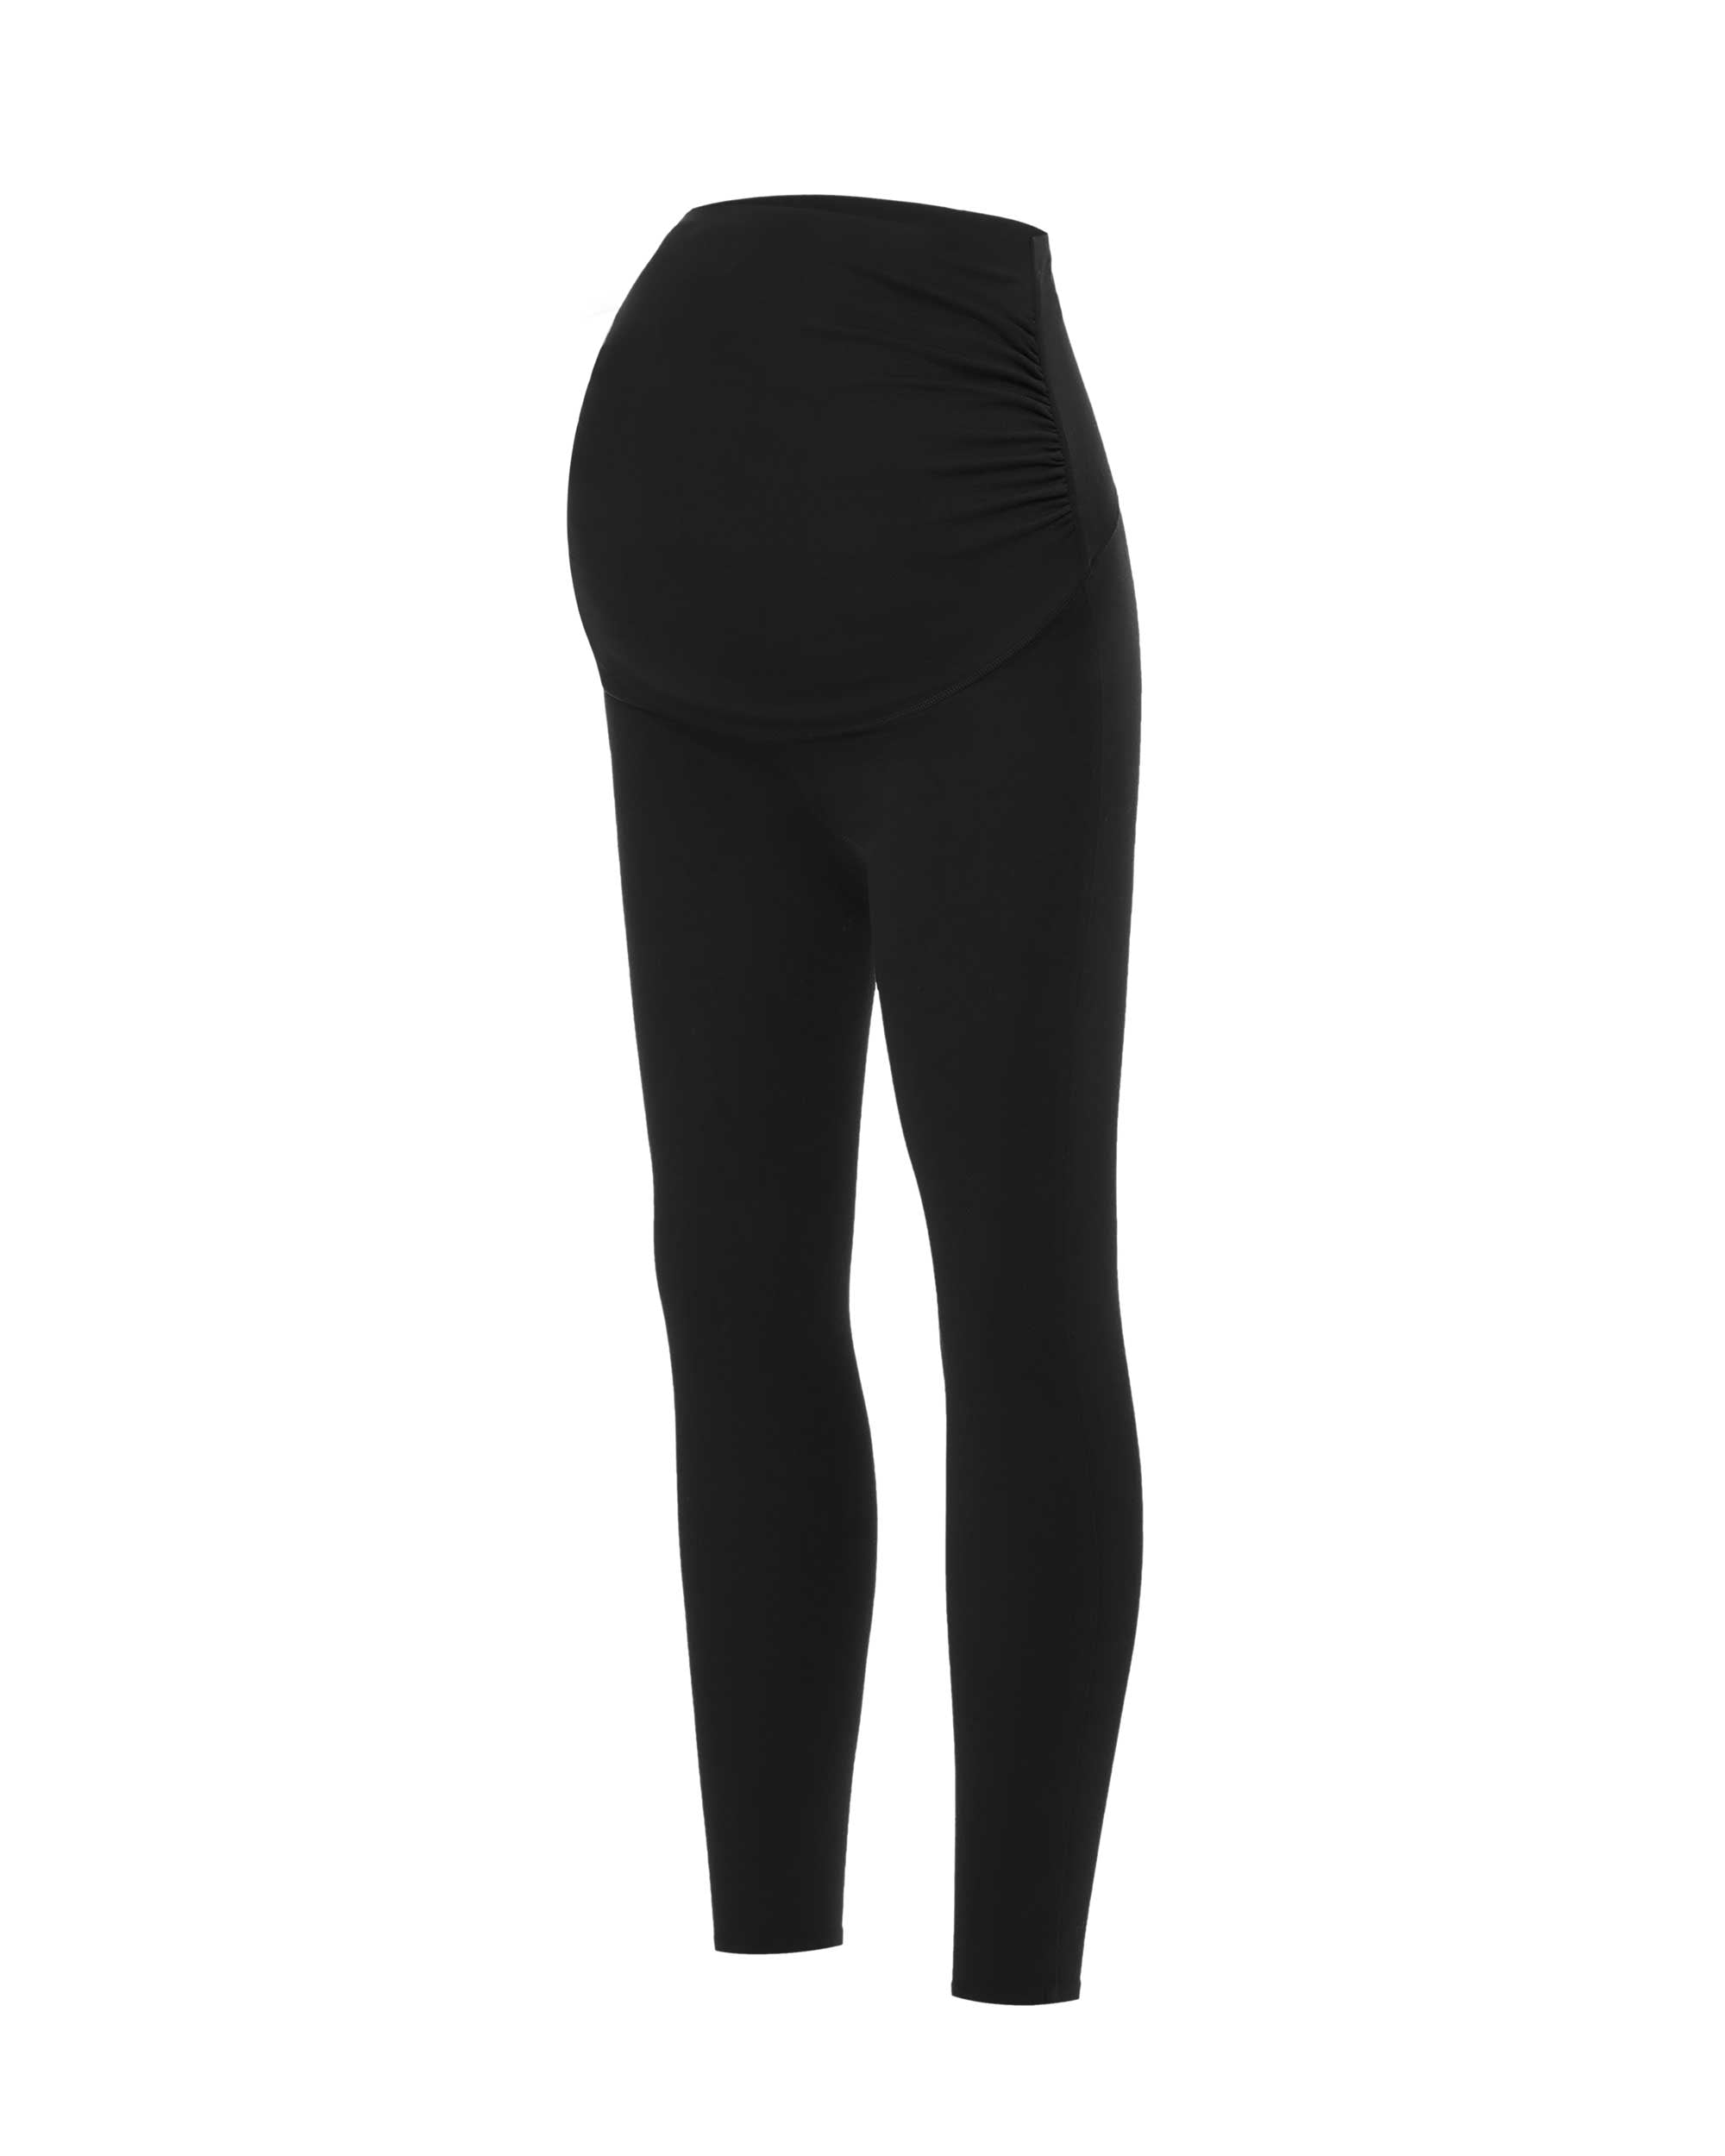 Buy FINESSE Maternity Leggings/Tights - Set of 3 (XX-Large) Black White Red  at Amazon.in